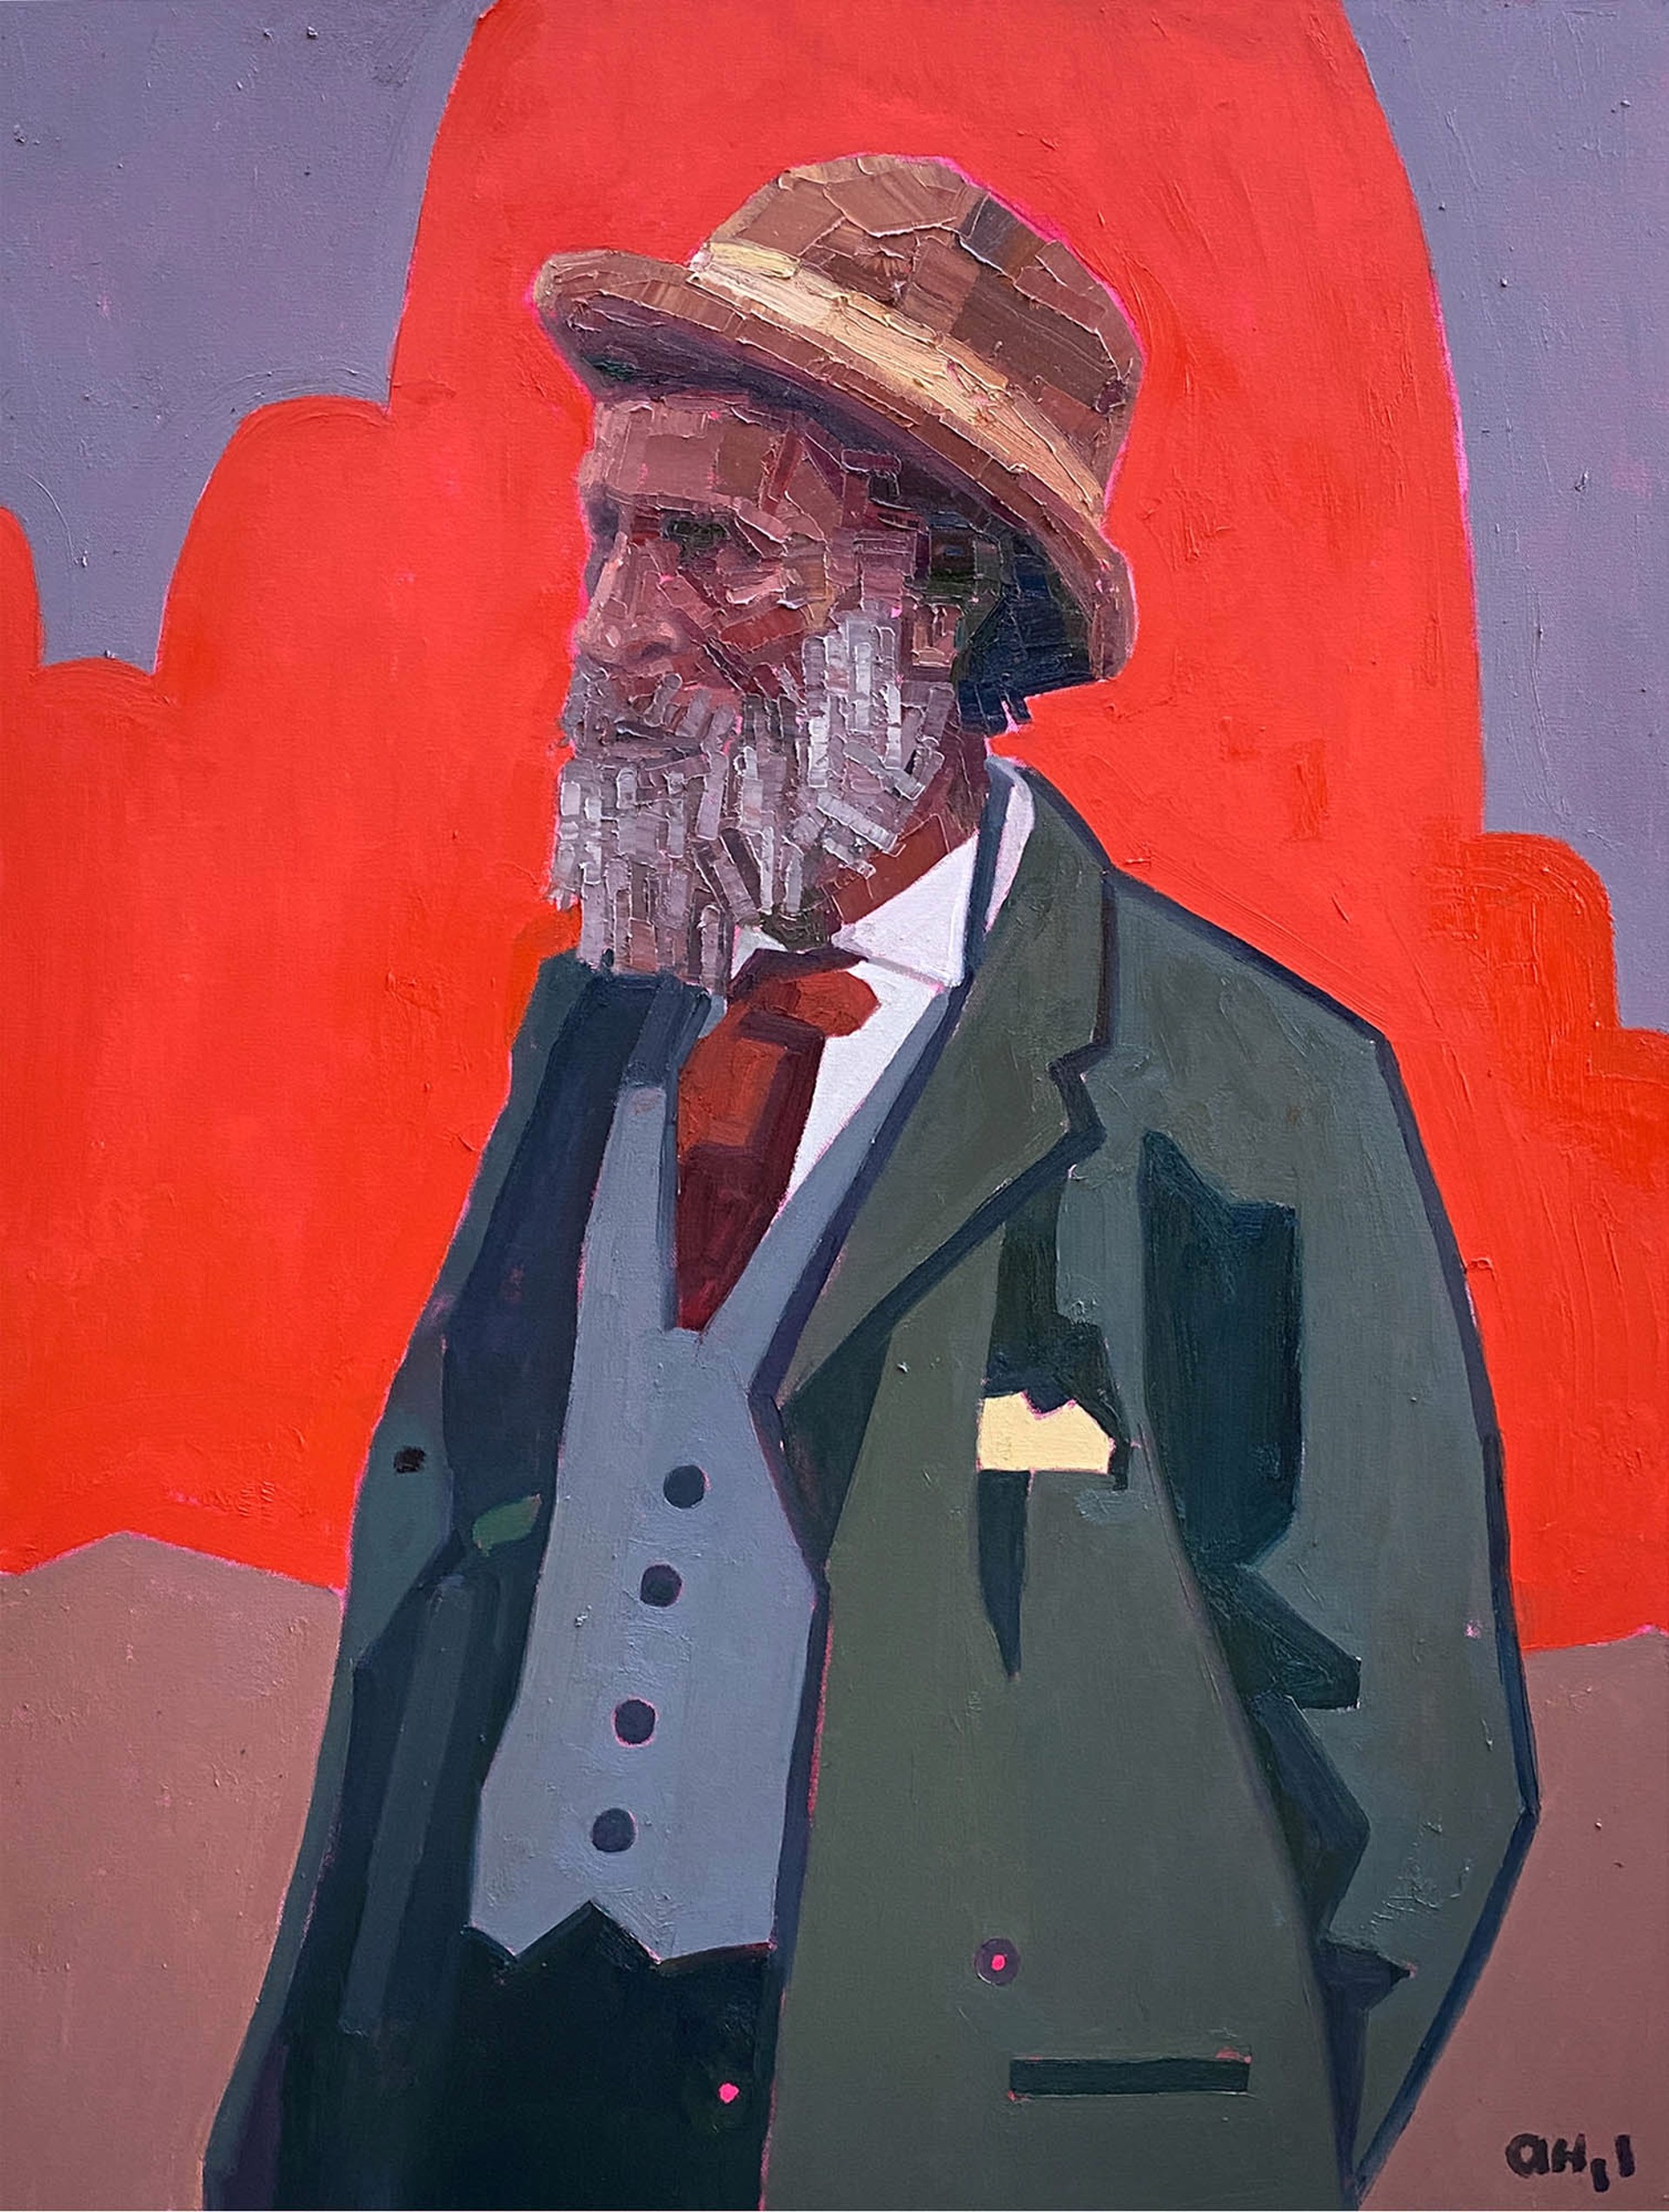 Original Oil Painting Featuring A Portrait Of John Muhr In Palette Knife Style Over Abstract Red Background